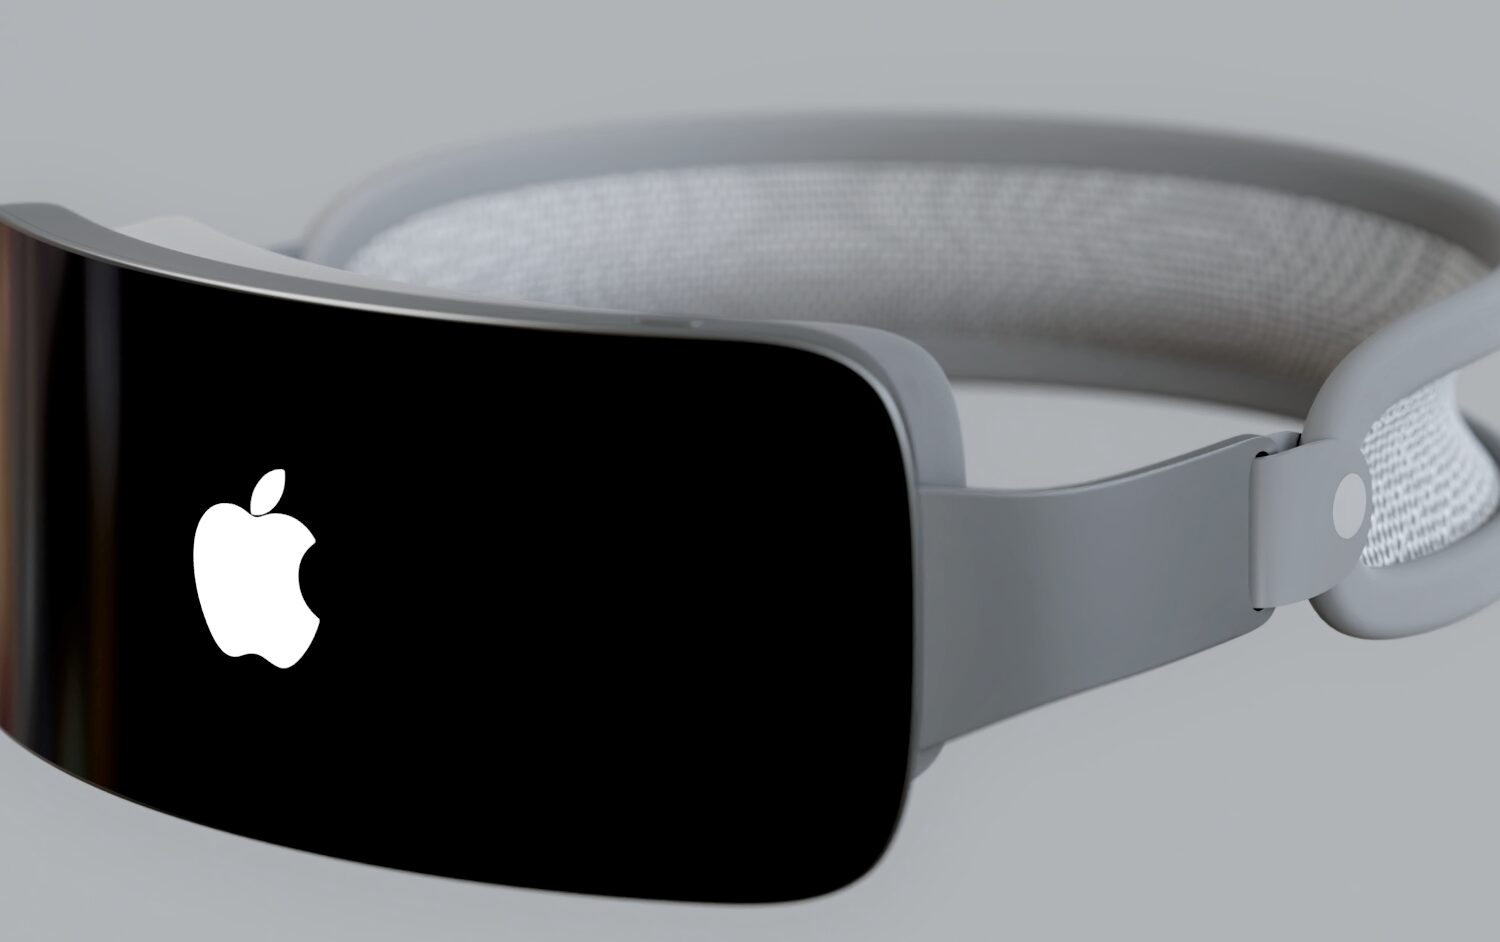 Rendering showing an Apple headset with the Apple logo on the external display